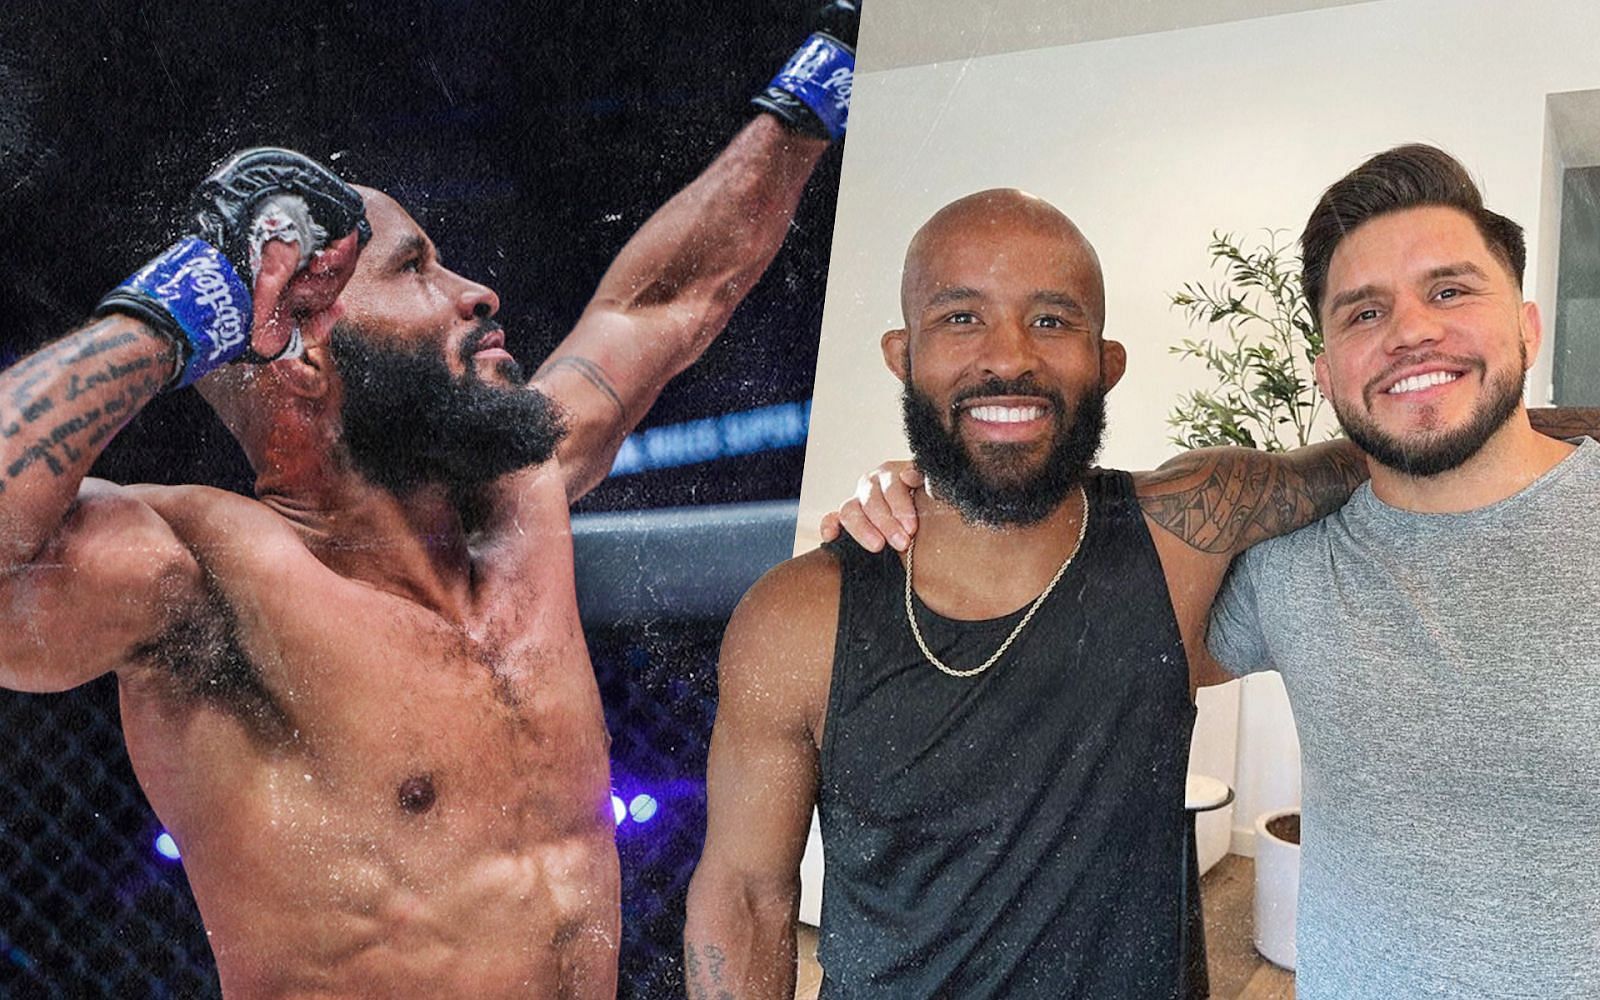 Demetrious Johnson (left) trains with former rival Henry Cejudo (right) ahead of ONE 161. [Photos ONE Championship, Demetrious Johnson Instagram]